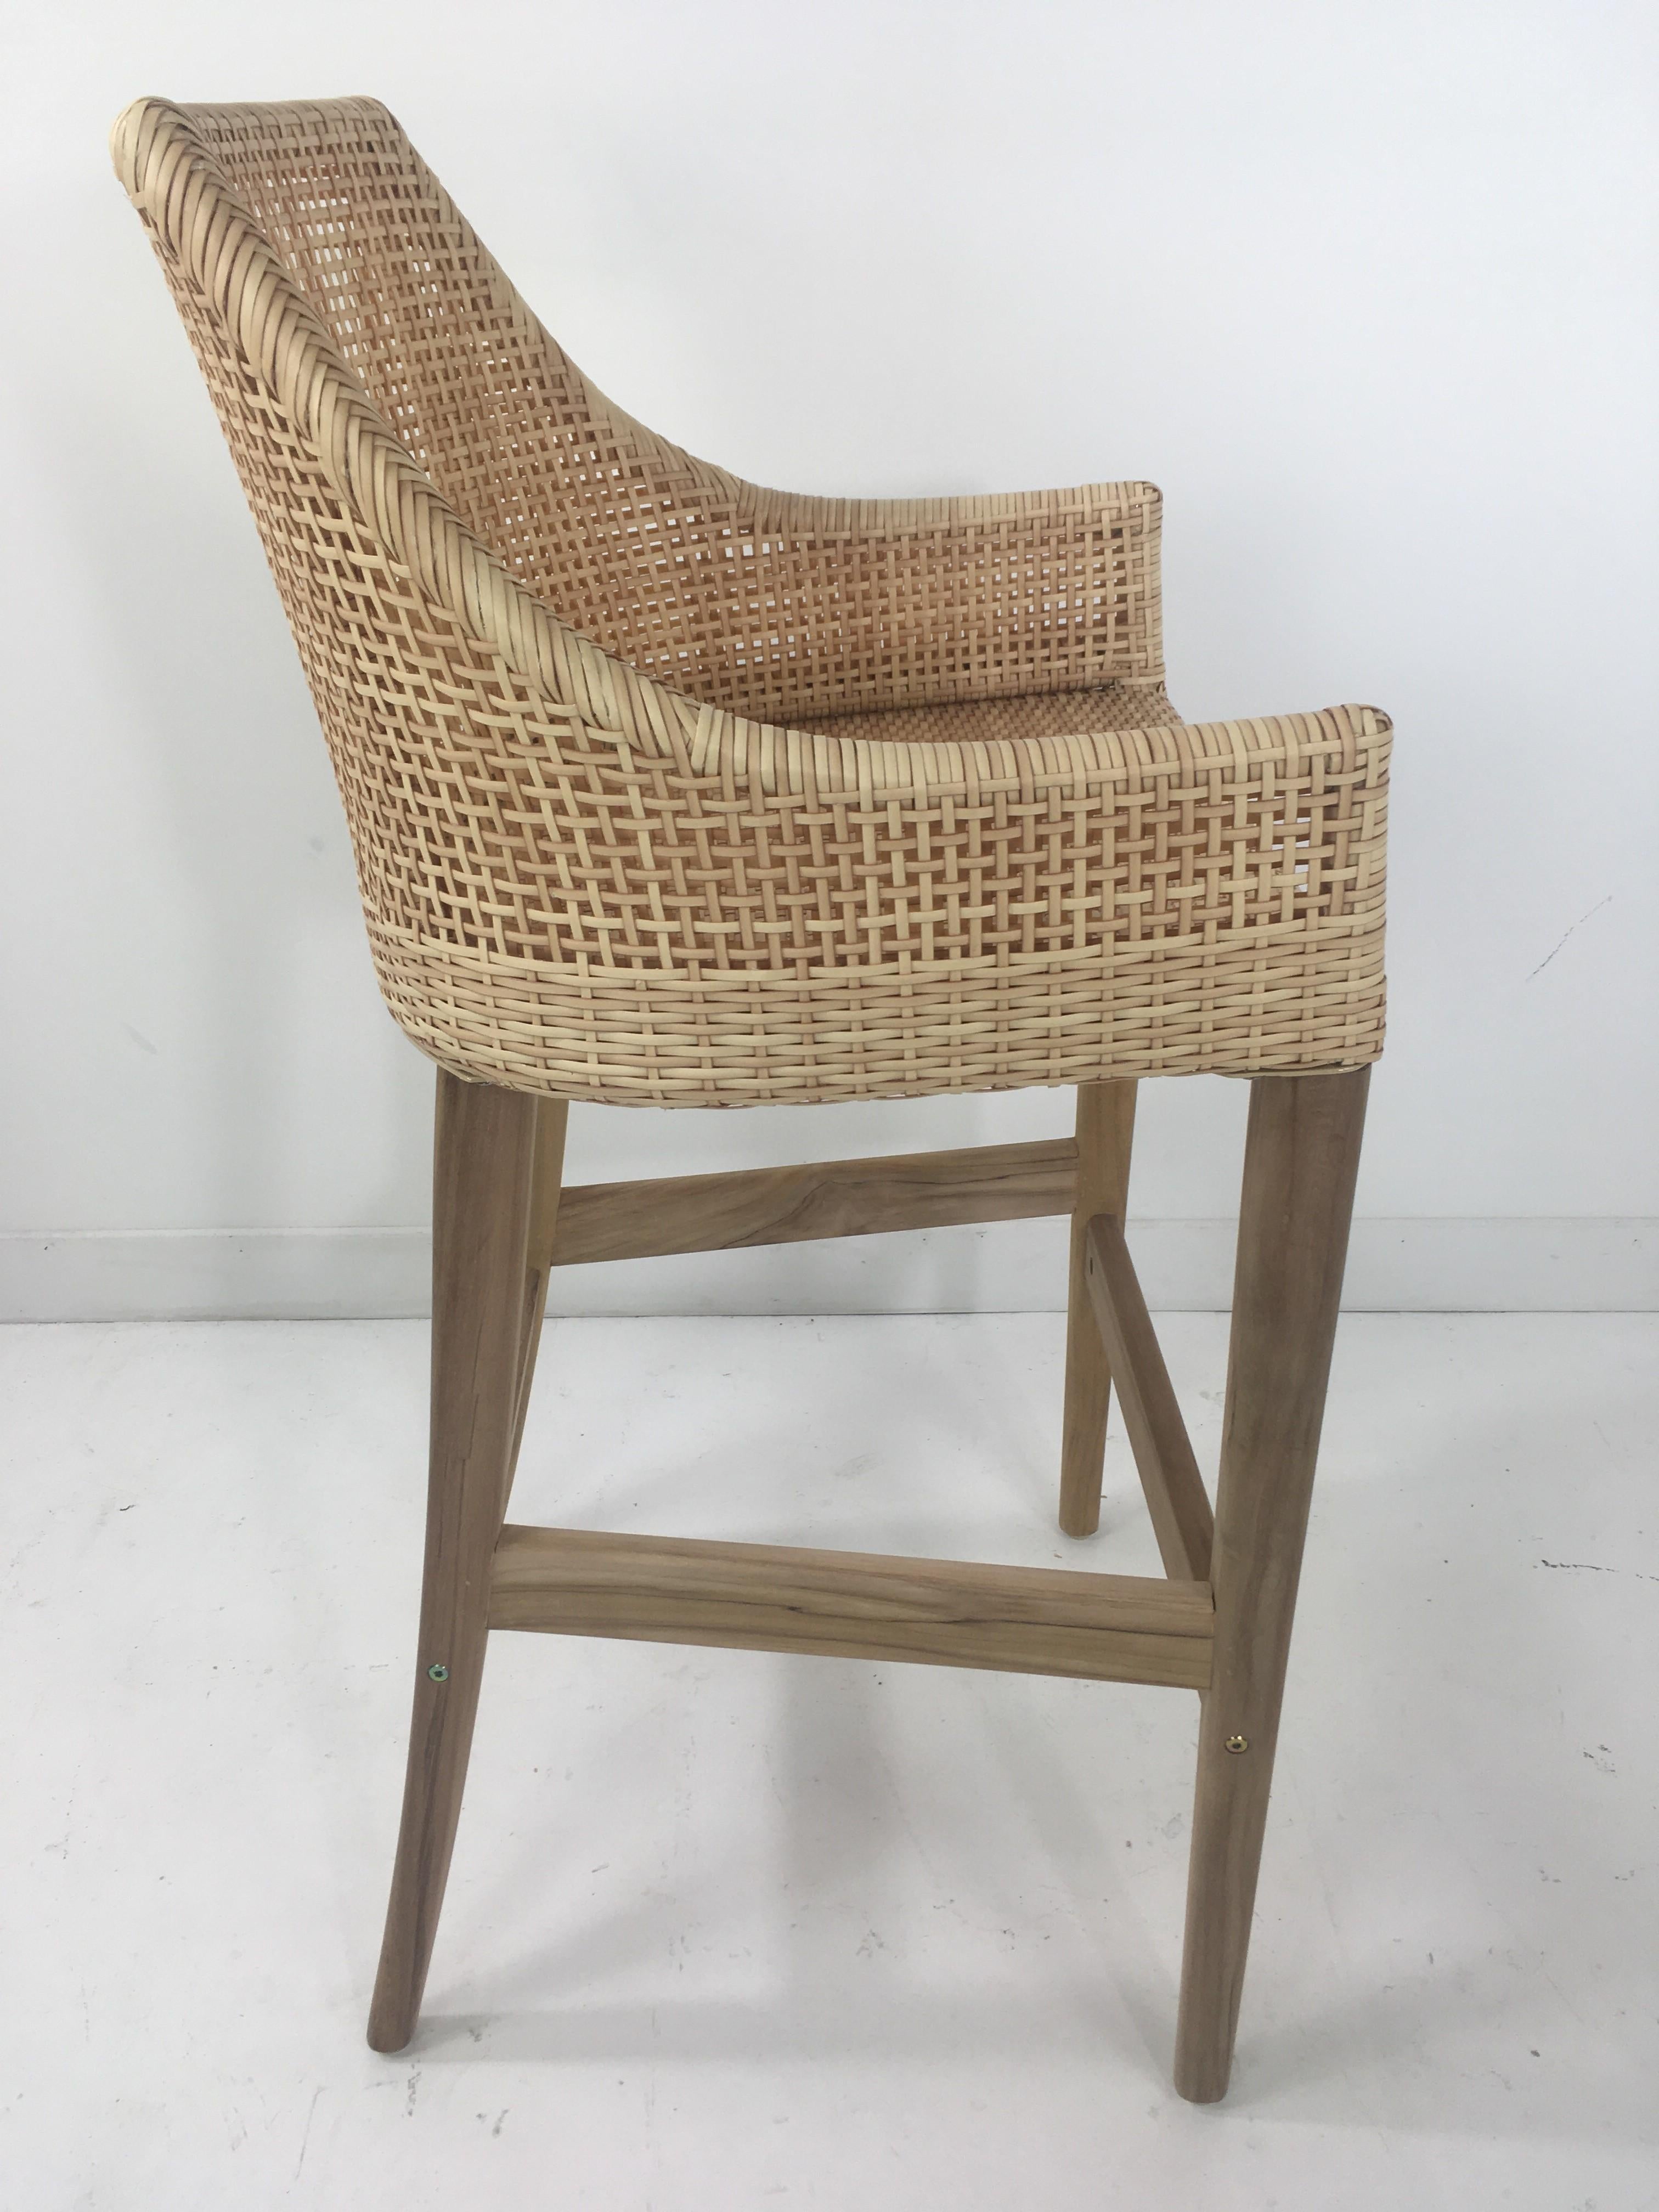 Teak Wooden and Braided Resin Rattan Effect Outdoor Bar Stool For Sale 2